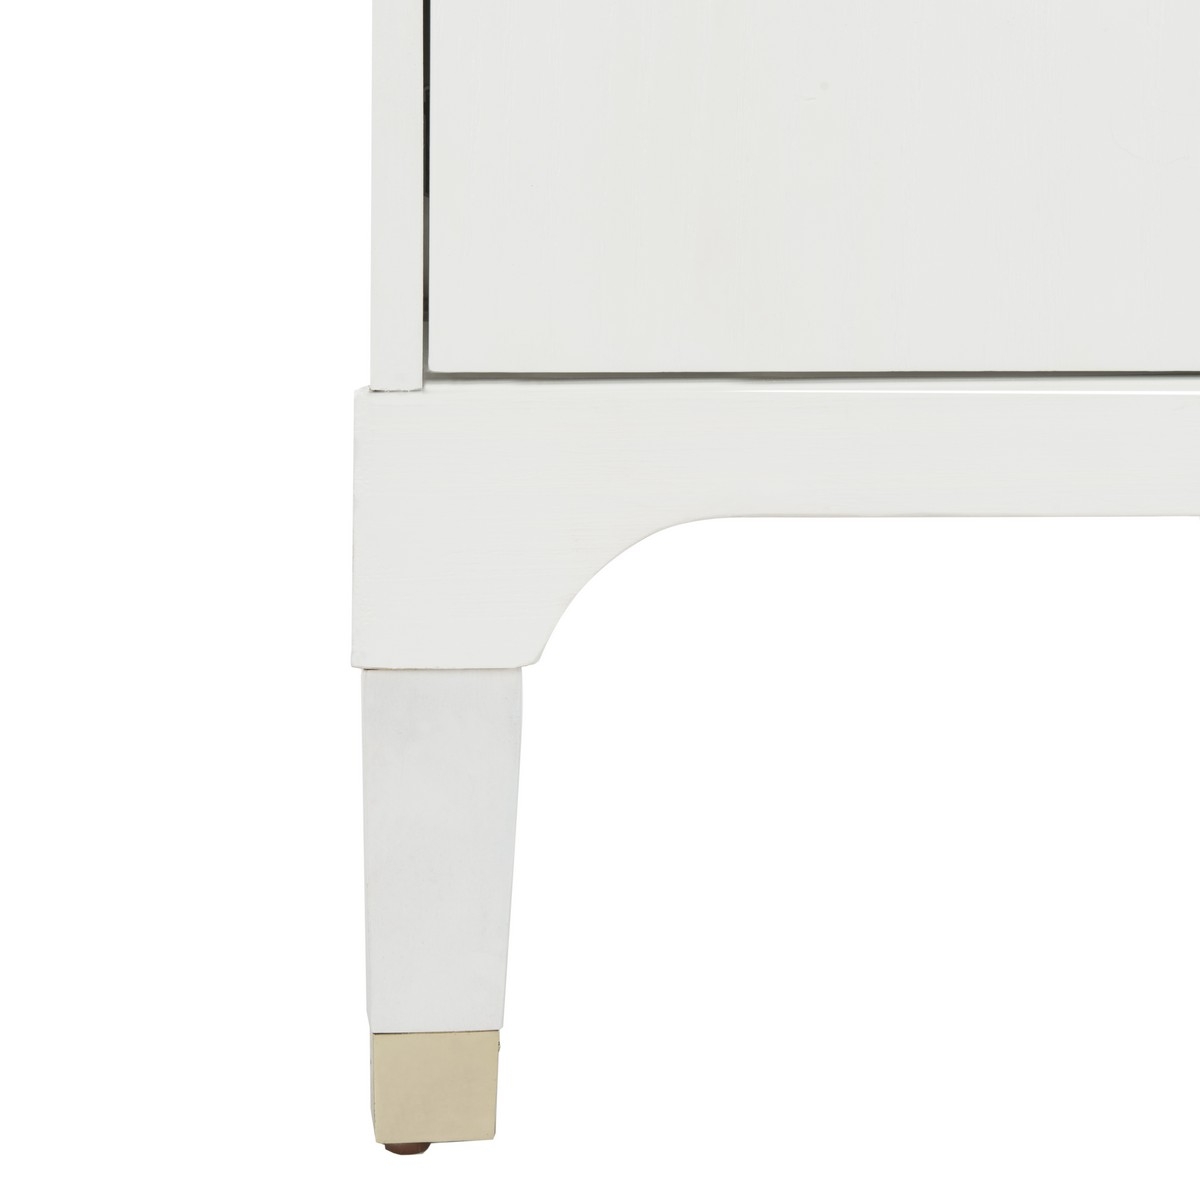 Lorna 3-Drawer Contemporary Night Stand, White - Image 6